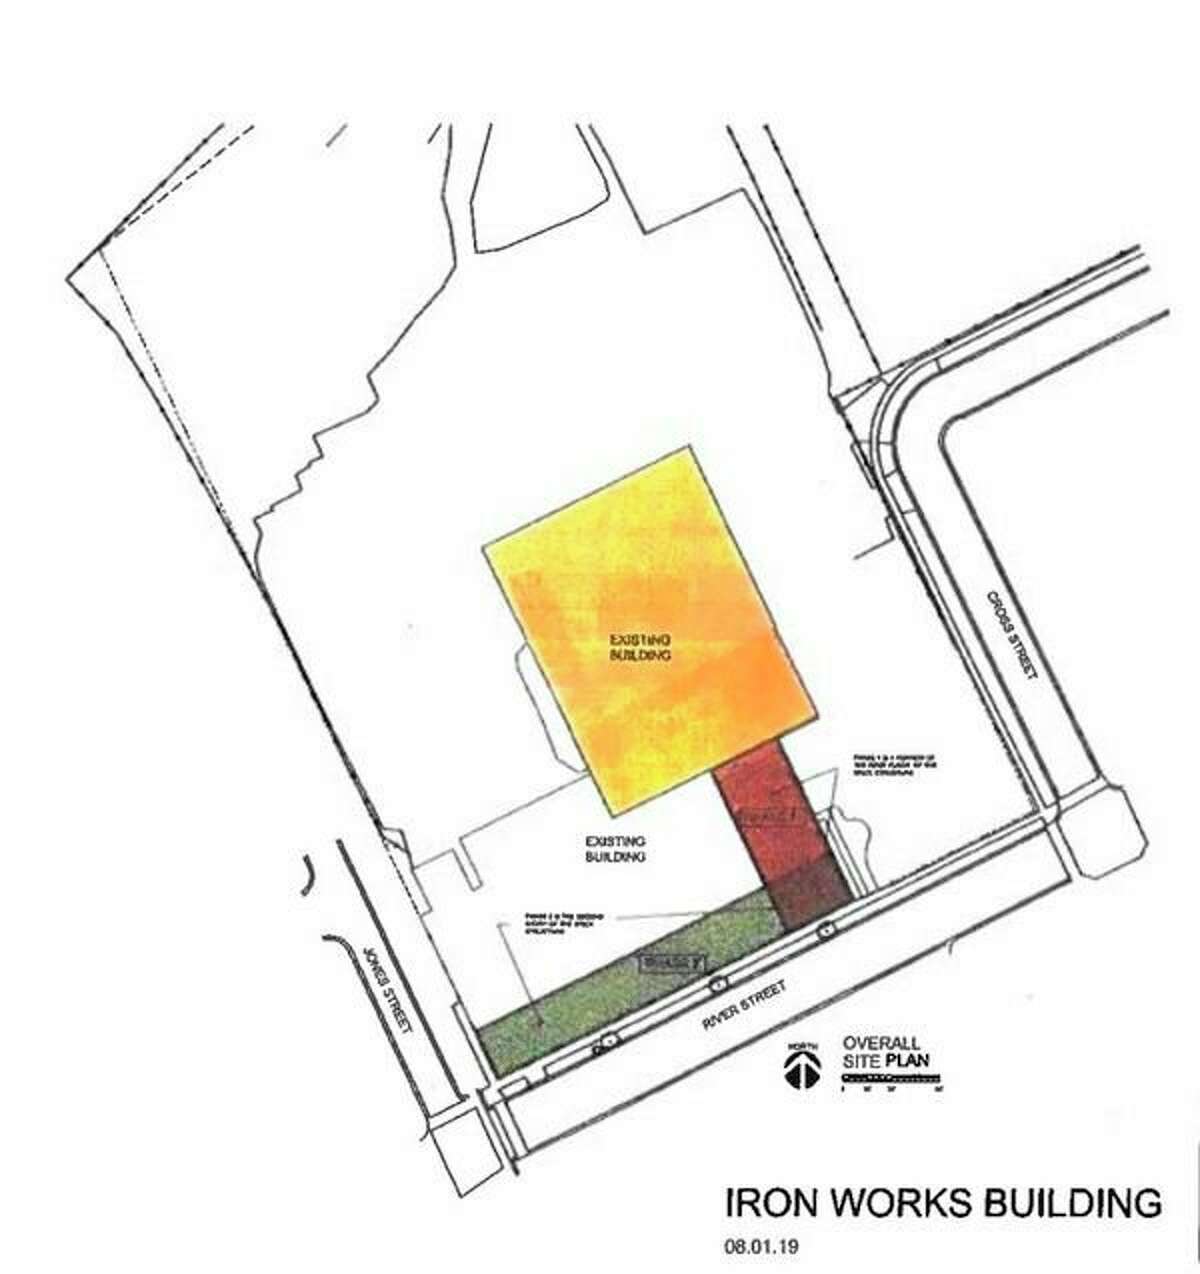 A public hearing was held on Nov. 7 for a medical marijuana grow operation proposed at the Iron Works building. Pictured is a site plan for the proposed business. (Courtesy Map)